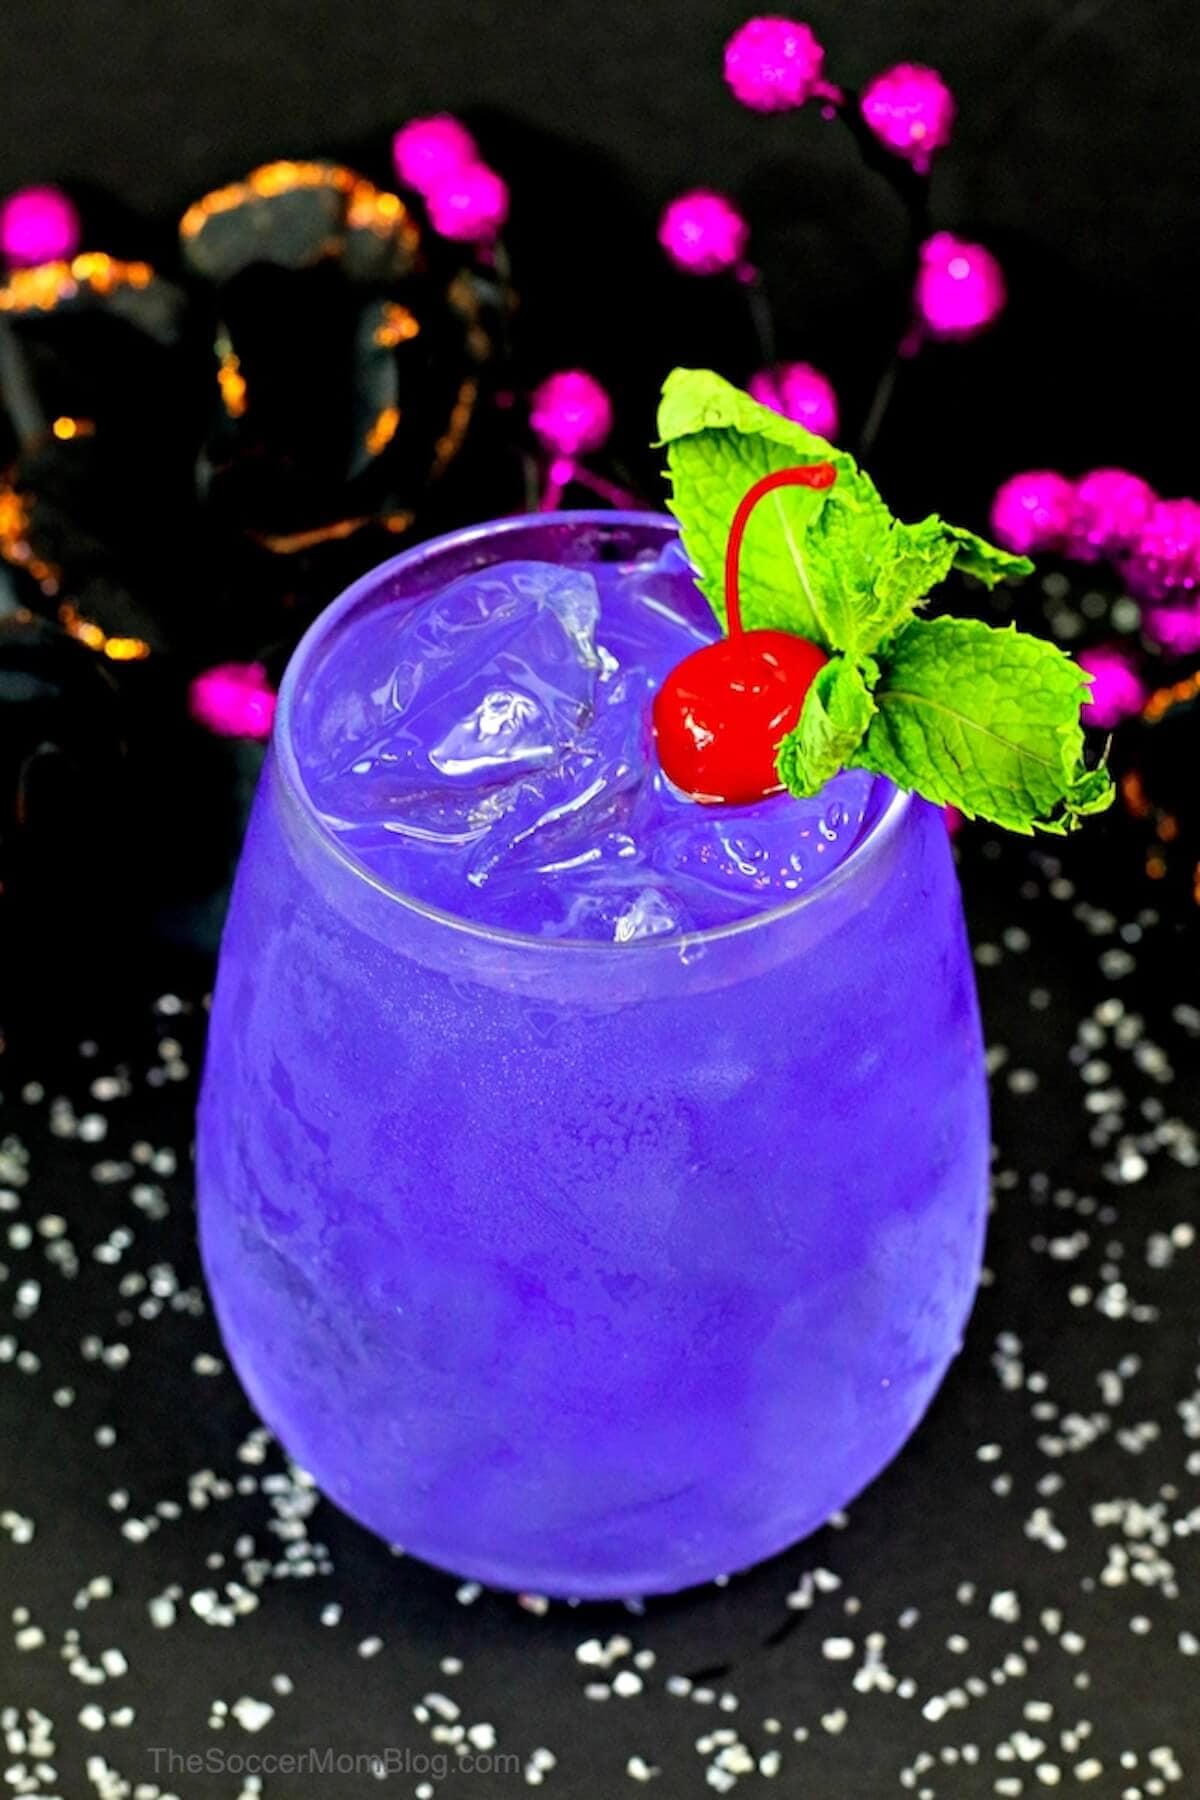 Purple cocktails topped with cherry and bright green mint for garnish.